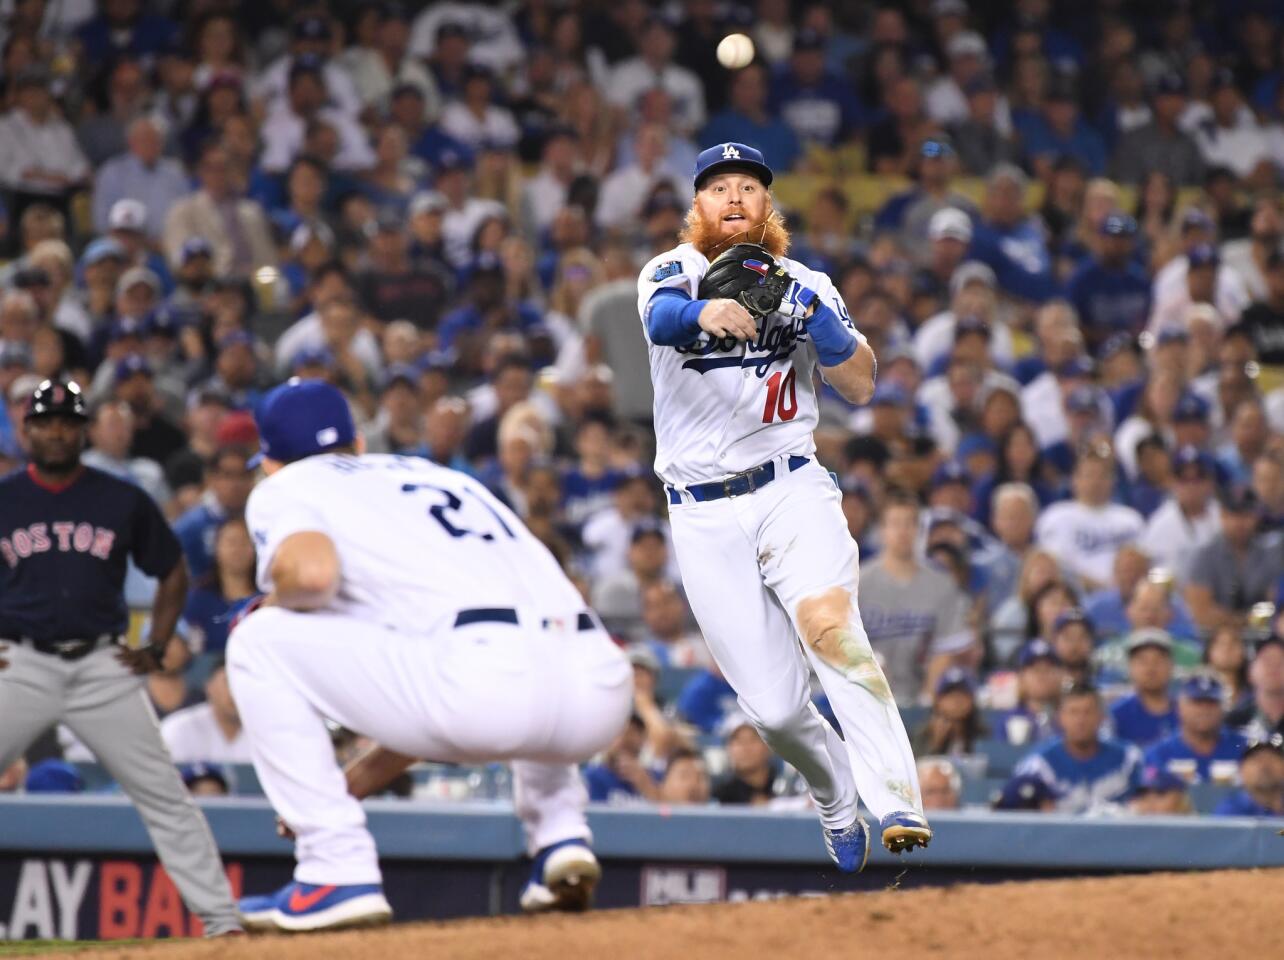 Dodgers 3rd baseman Justin Turner throws over pitcher Walker Buehler to throw Red Sox's Blake Swihart out in the 6th inning.